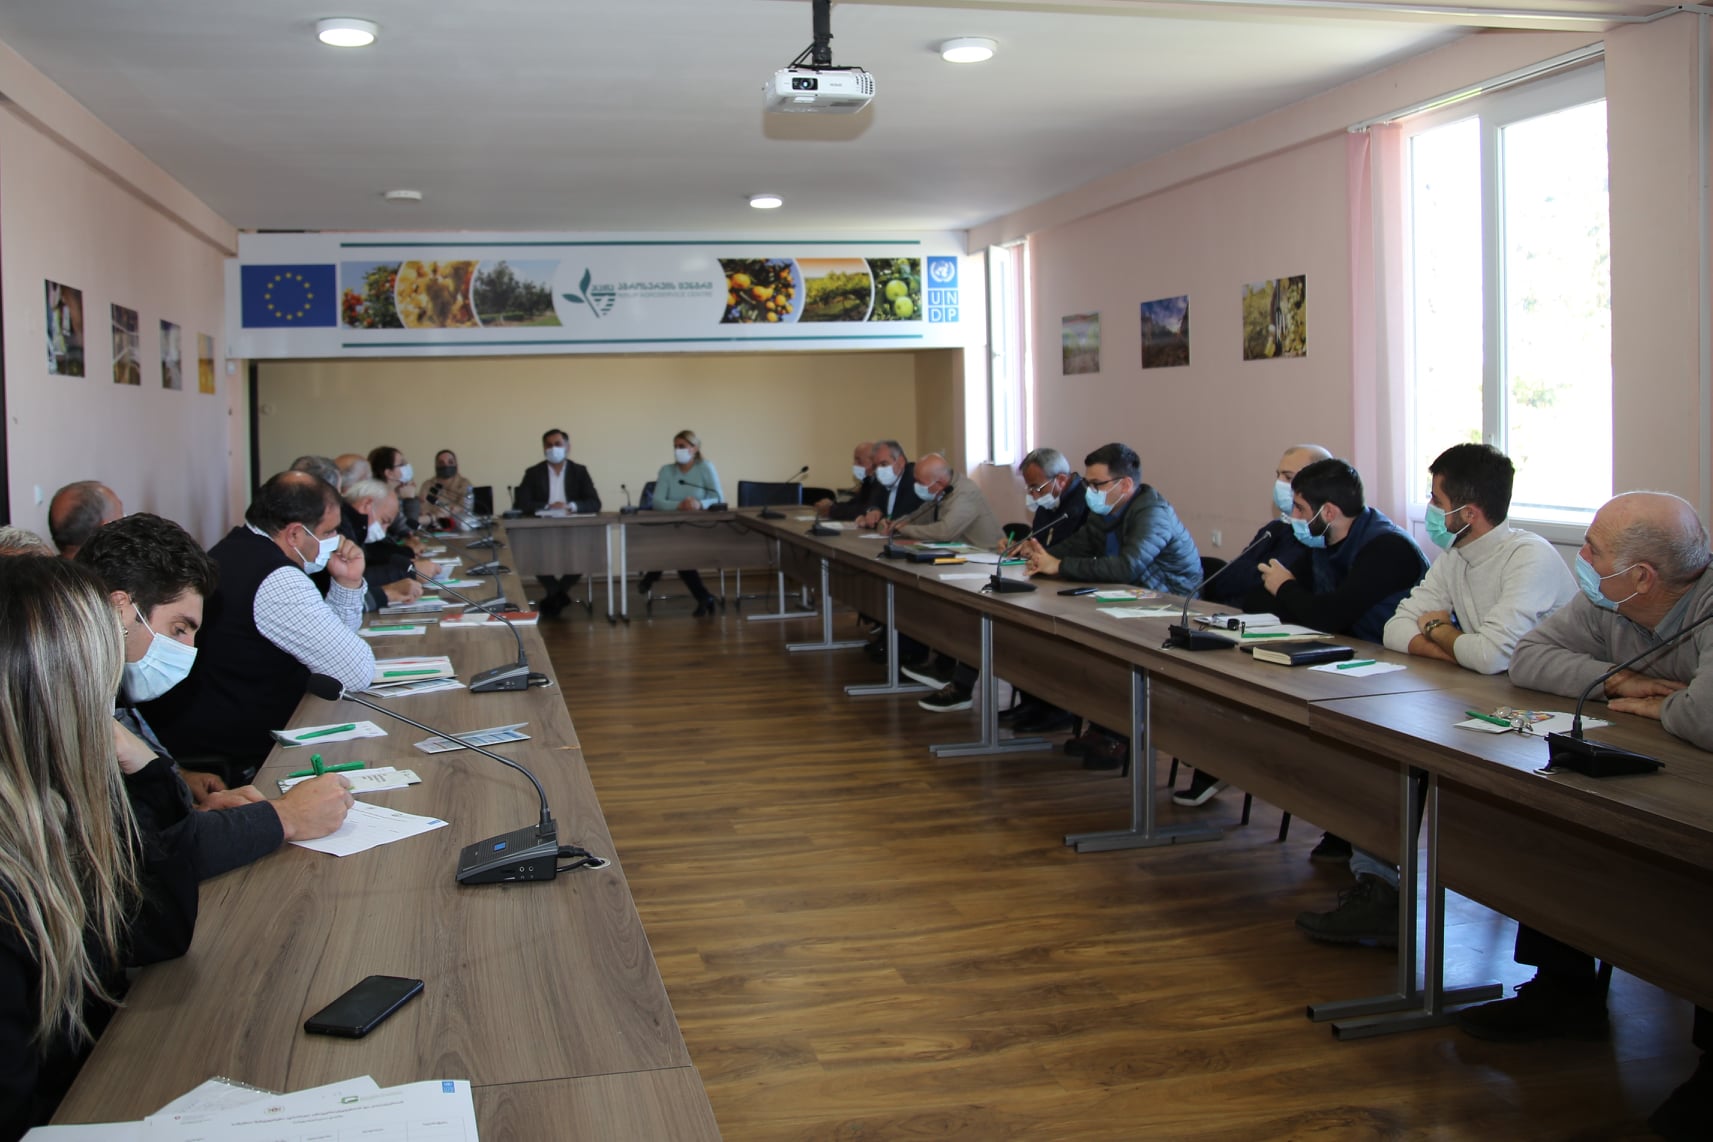 The new training modules were introduced to the representatives of the University and Agrarian Colleges